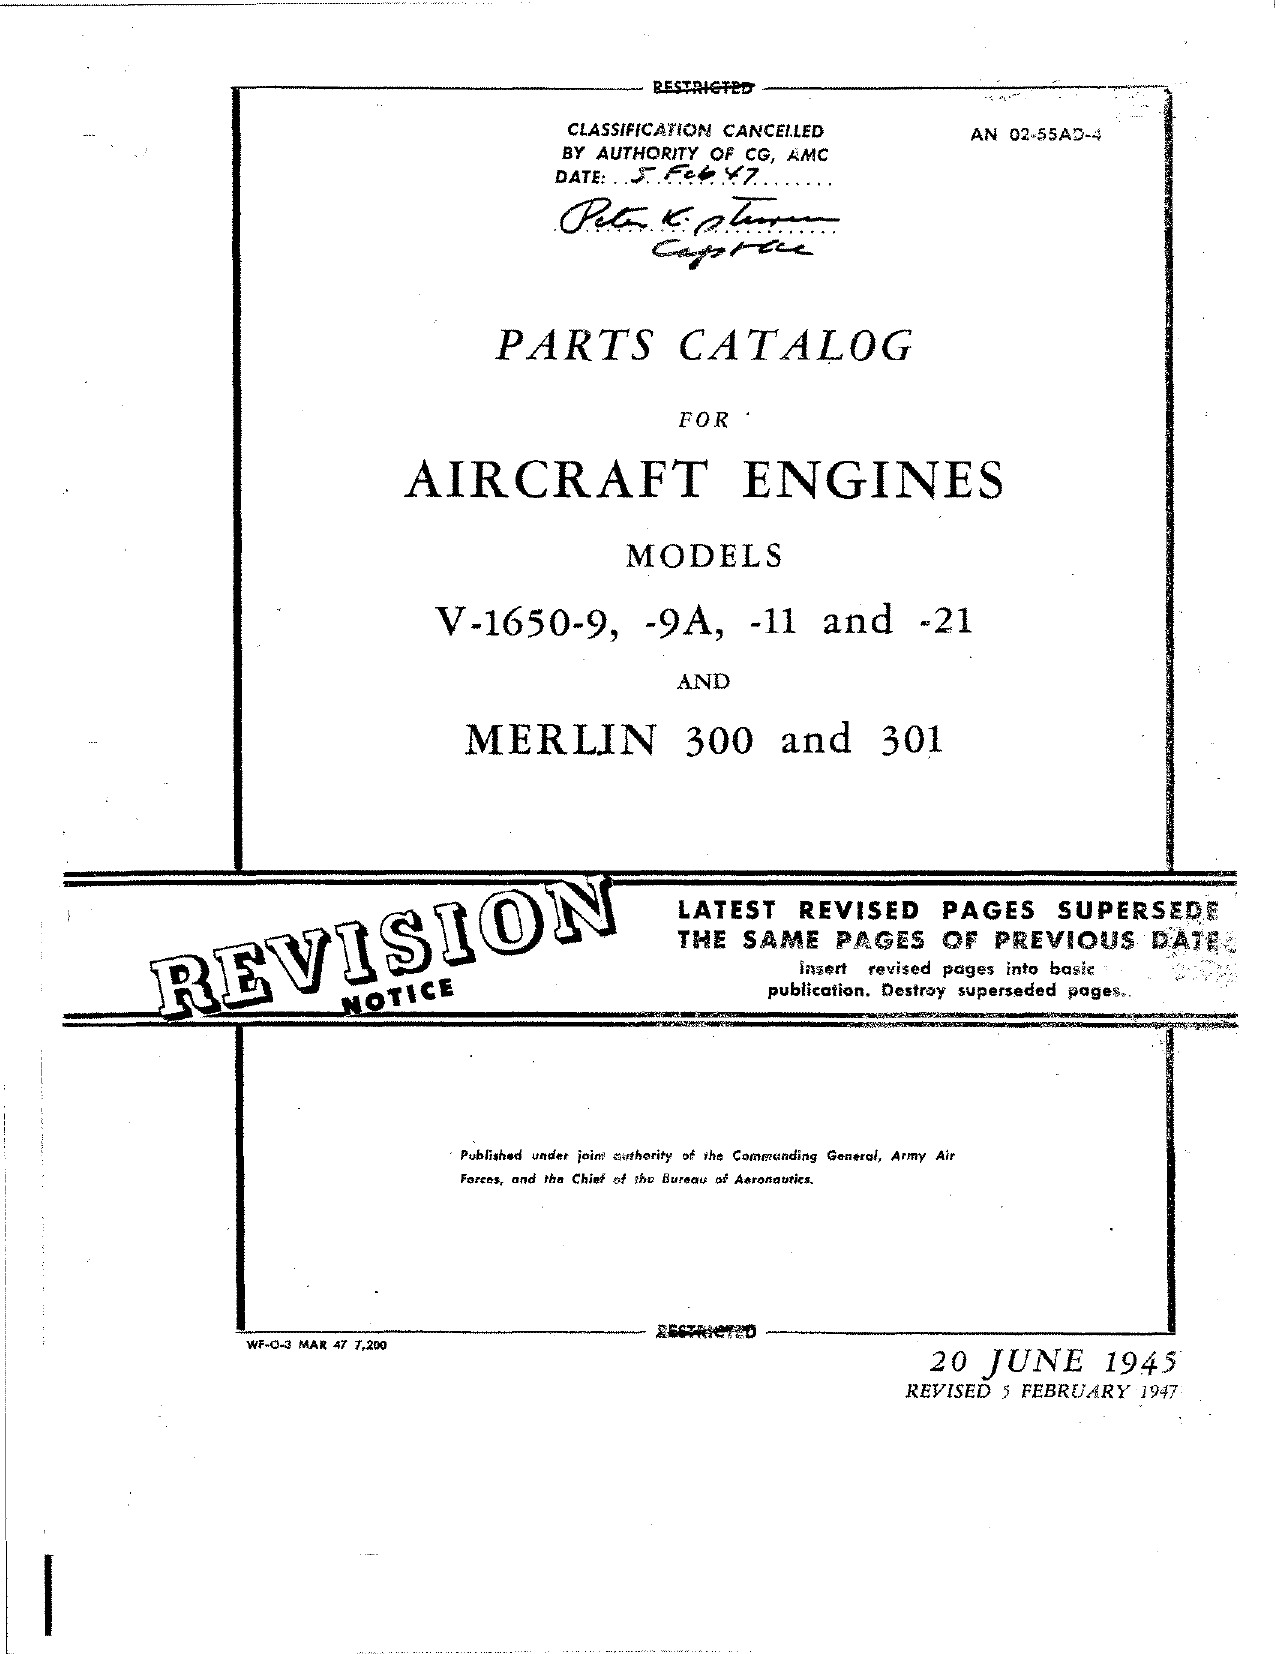 Sample page 1 from AirCorps Library document: Parts Catalog for Engine Models V-1650-9, V-1650-9A, V-1650-11, and V-1650-21 - Merlin 300 and 301